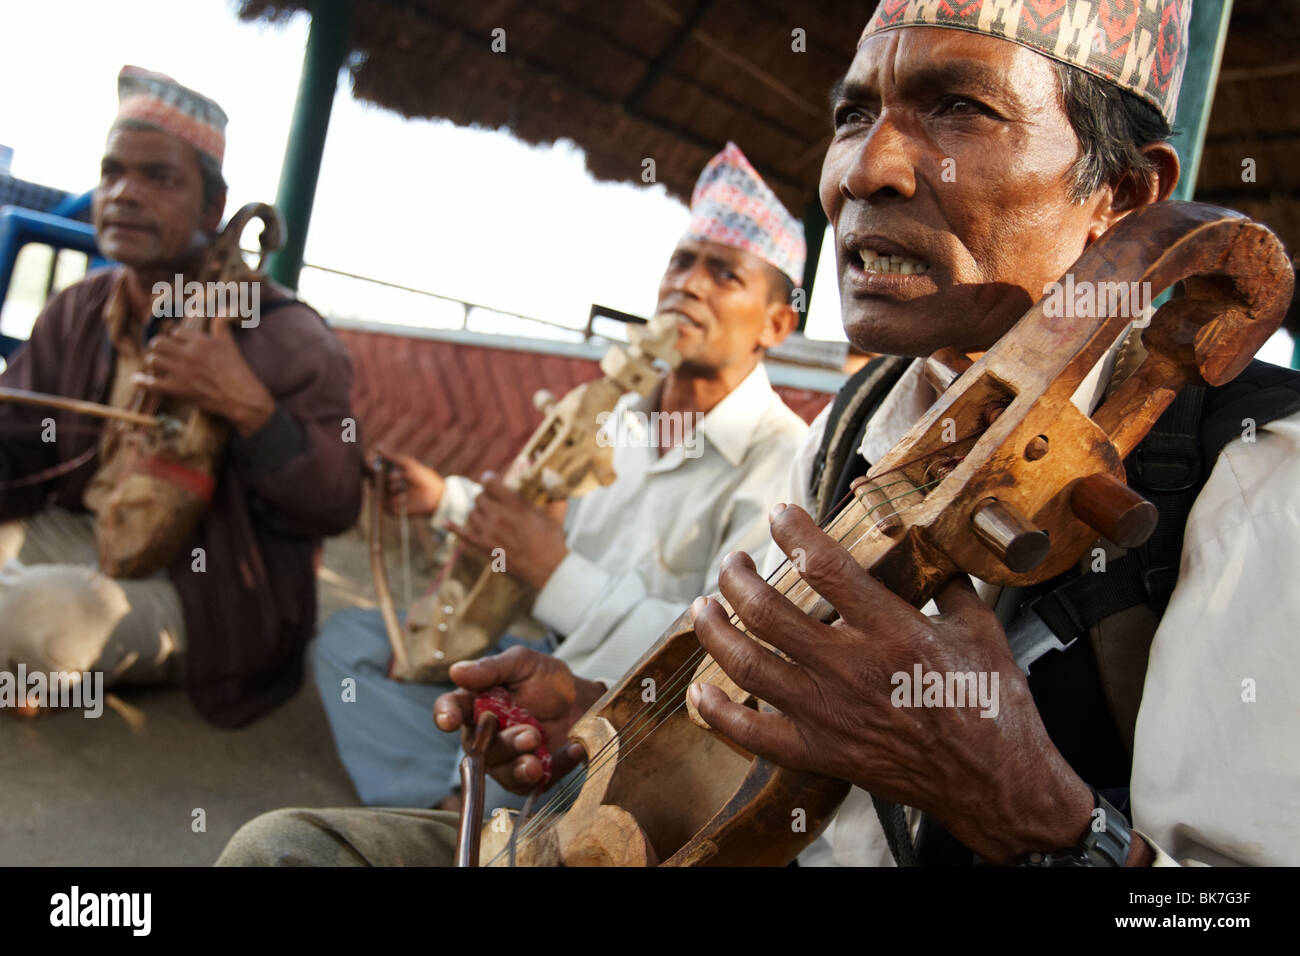 Musicians play a traditional string instrument at Begnas Lake near Pokhara, Nepal on Tuesday October 27, 2009. Stock Photo